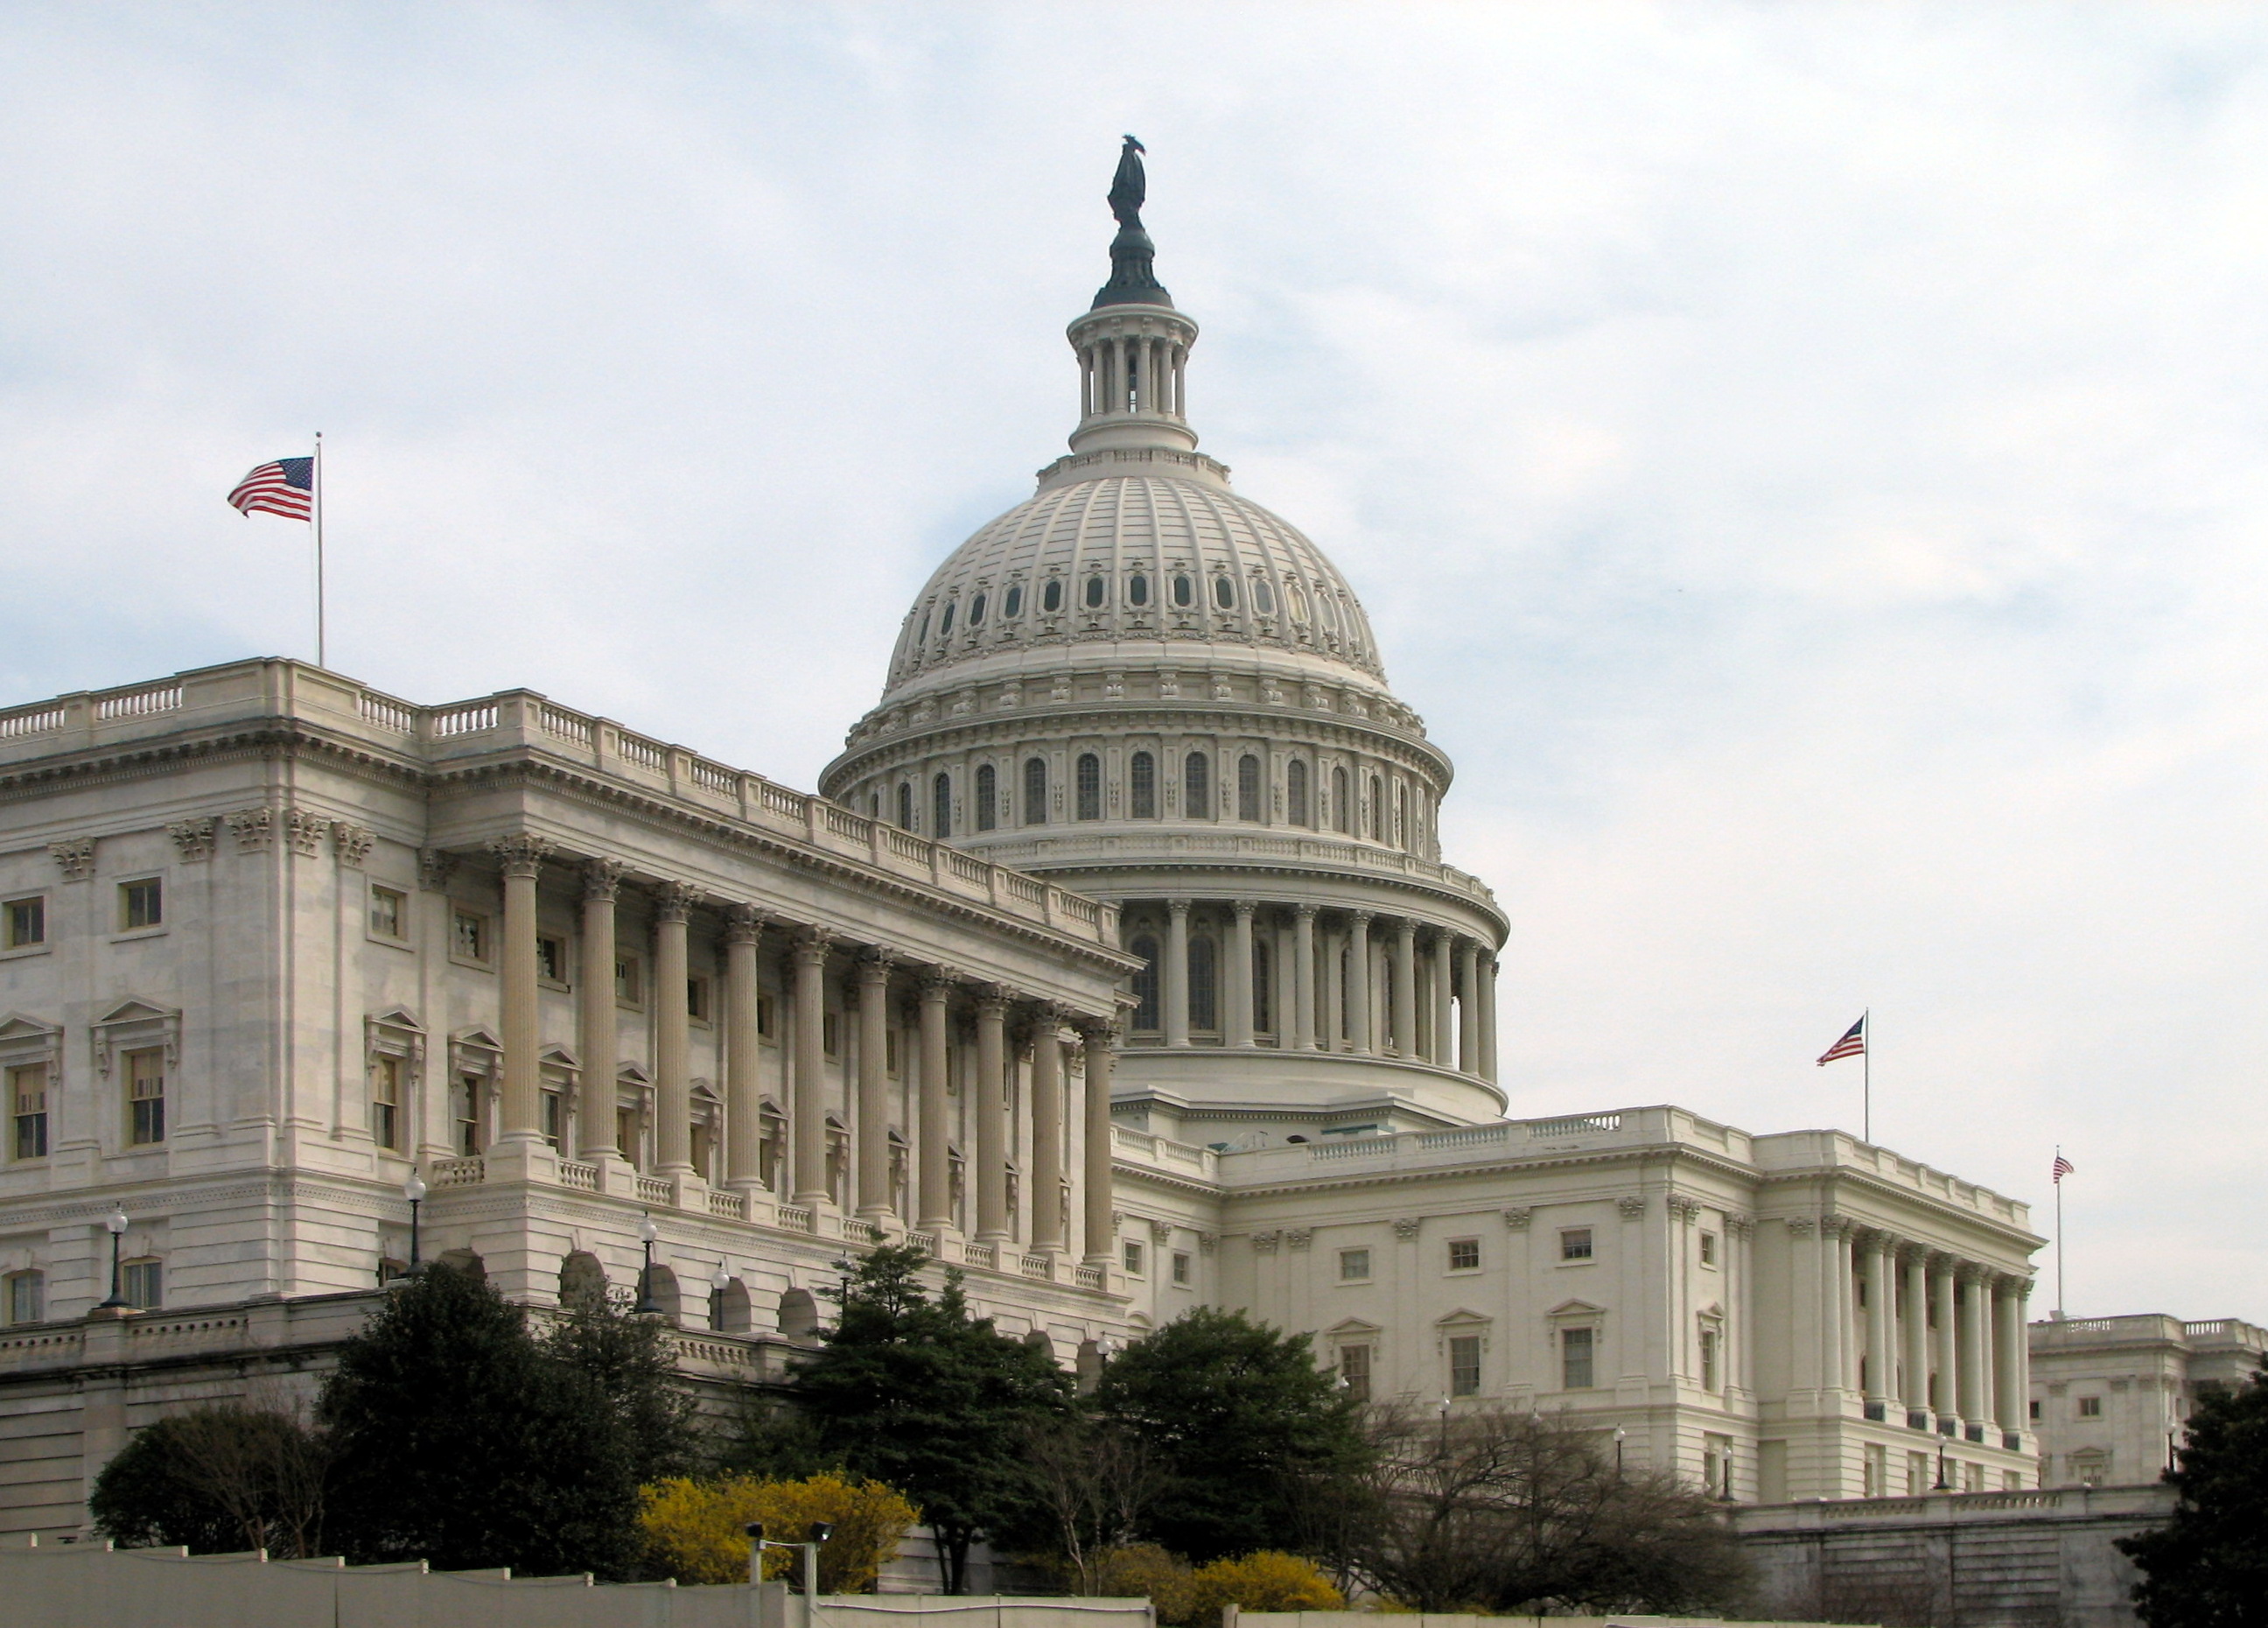 The Senate side of the United States Capitol in Washington, D.C. Photo taken on March 26, 2007.